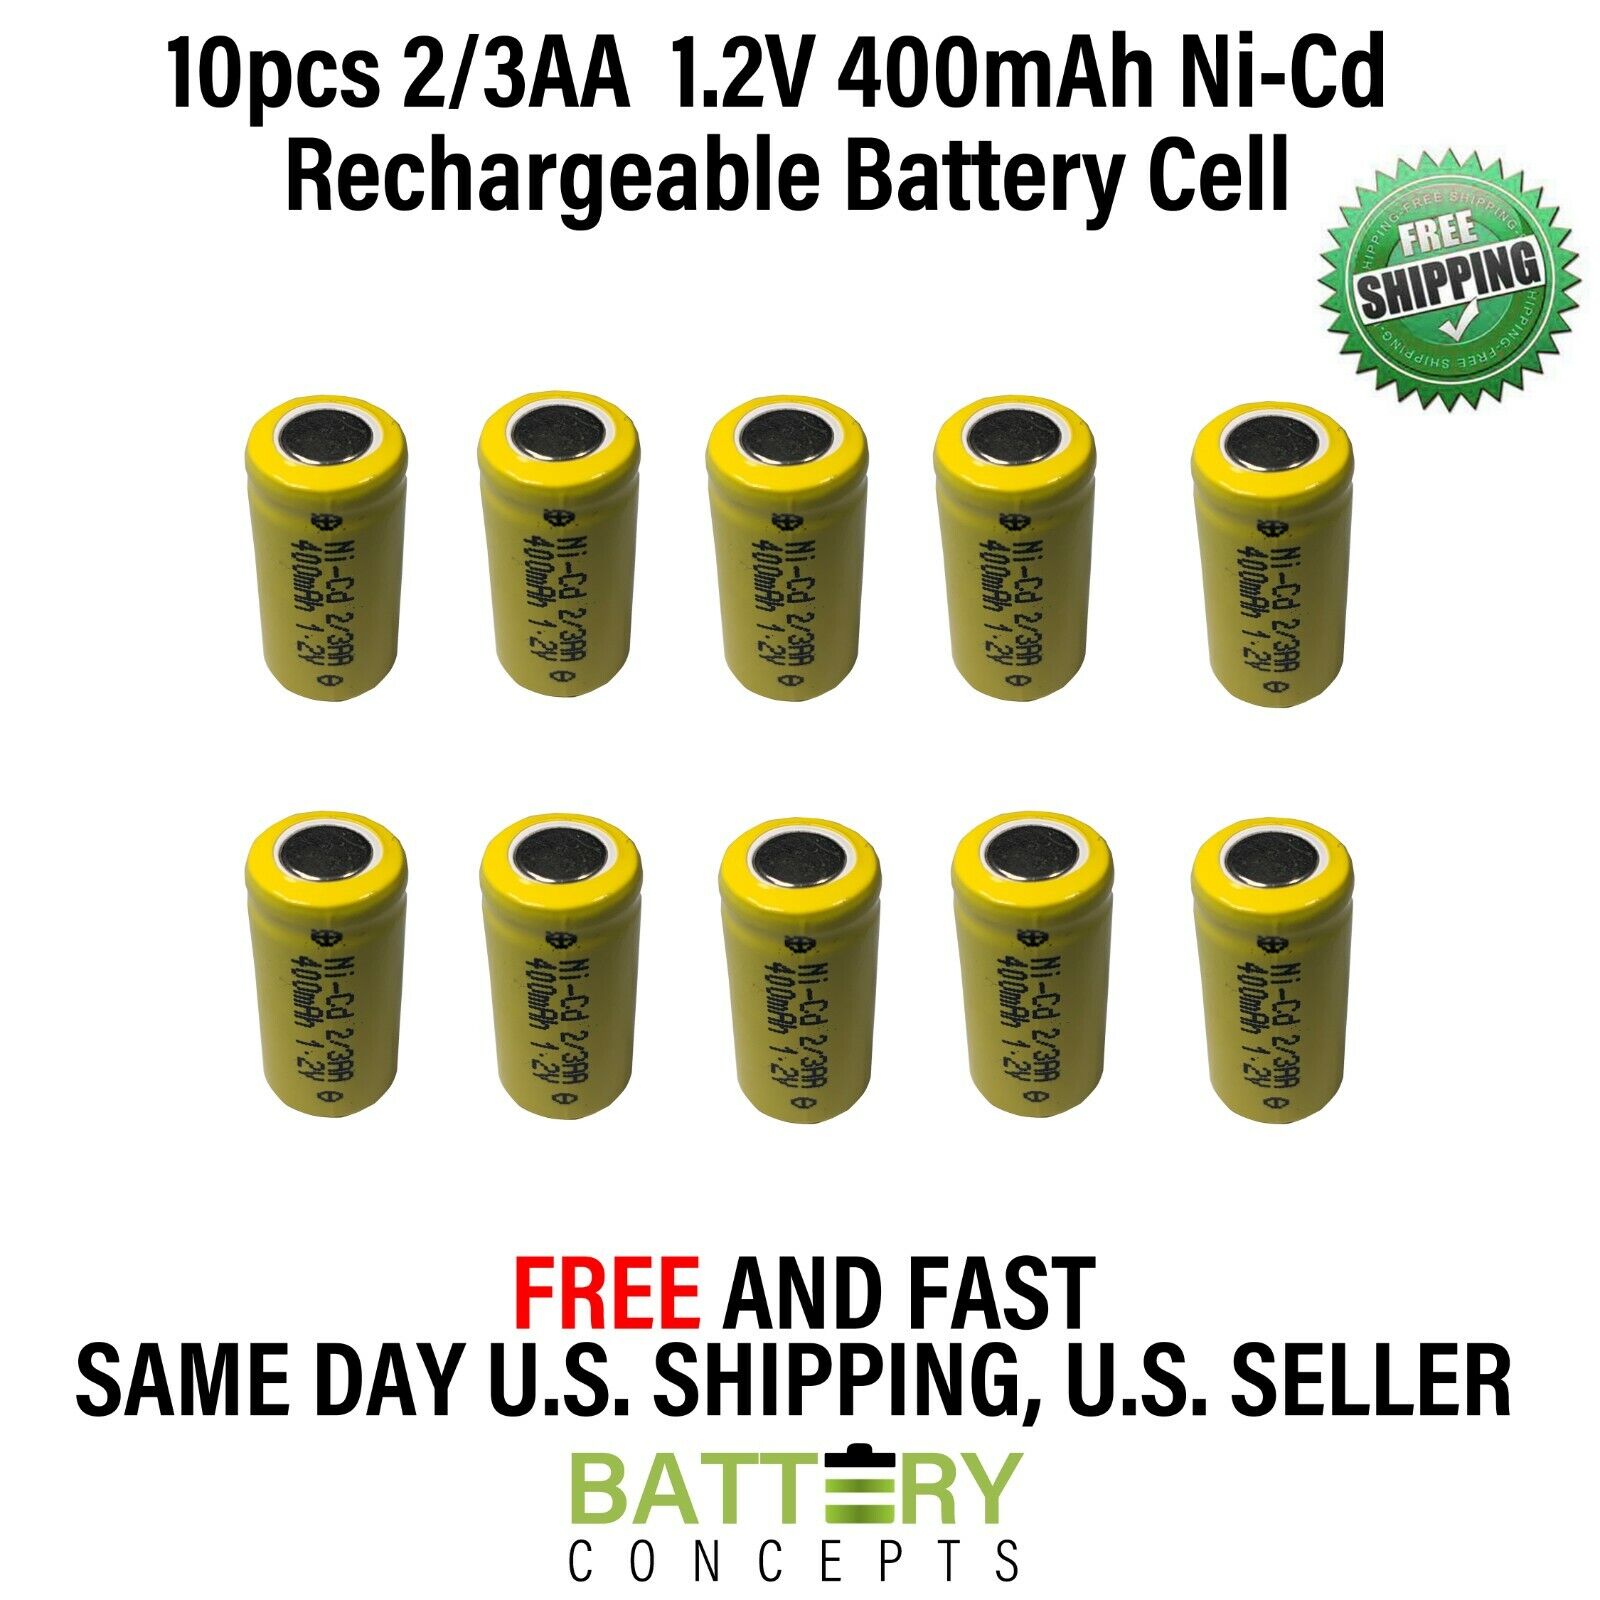 10 pcs 2/3AA 2/3 AA 400mAh NiCd Ni-Cad 1.2V Rechargeable Battery Cell US Stock Unbranded/Generic Does Not Apply